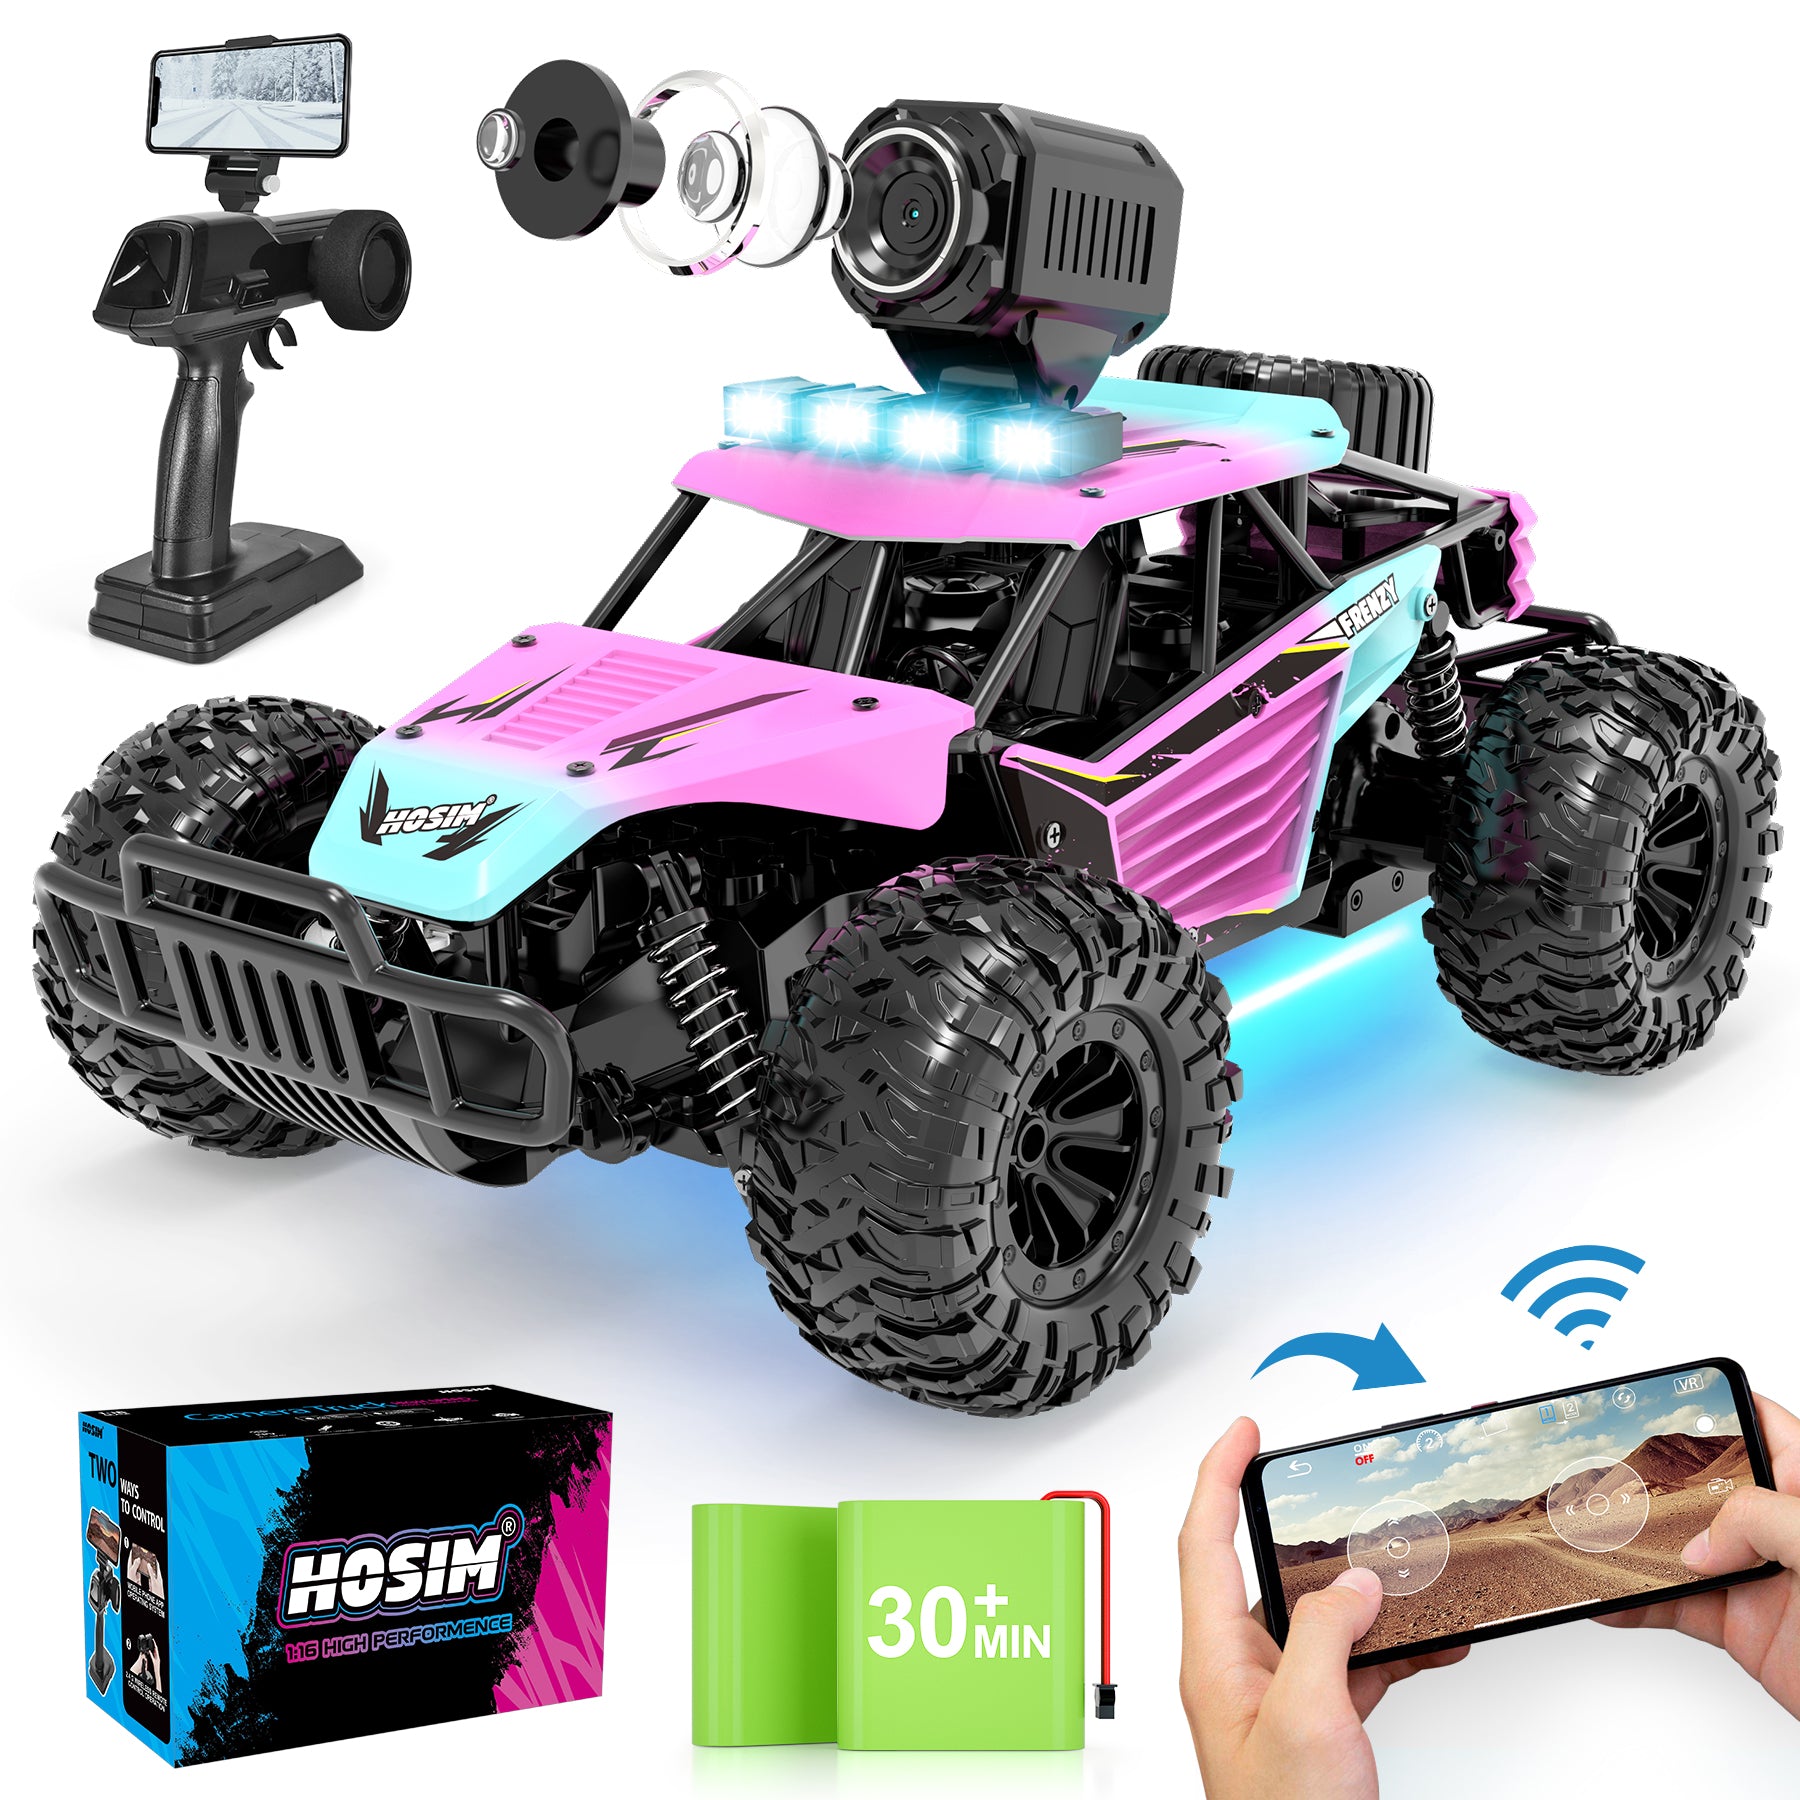 Hosim RC Cars with 1080P HD FPV Camera 1:16 Scale Remote Control Truck Car Off-Road High Speed Monster Trucks Gift Toys